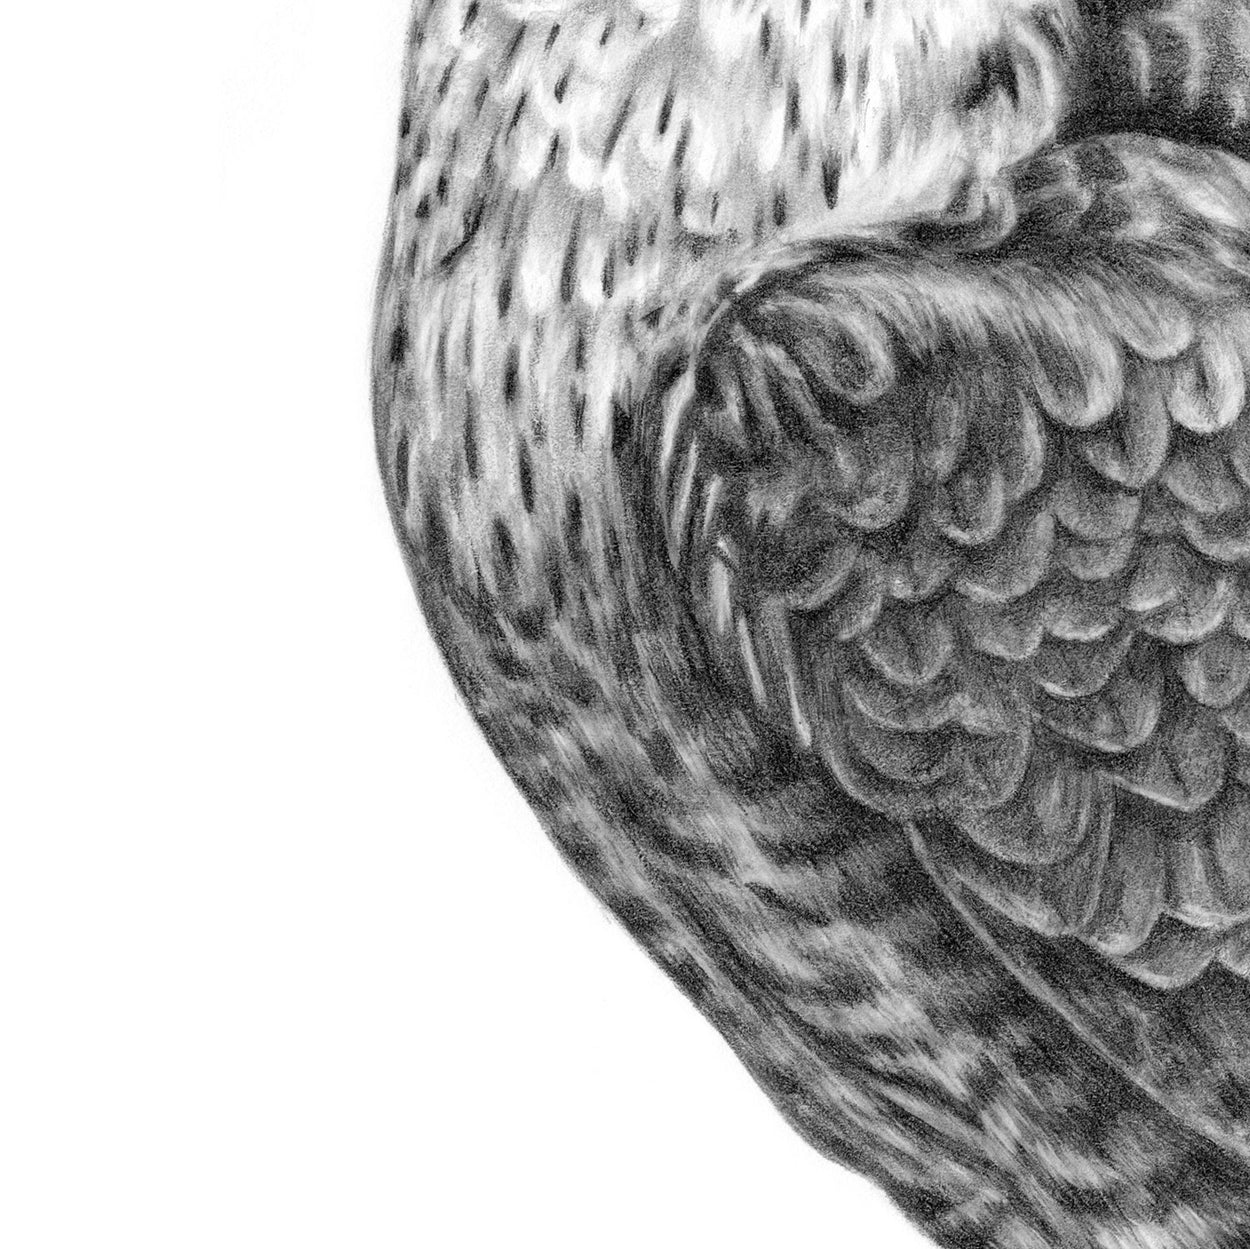 Peregrine Pencil Drawing Close-up 2 - The Thriving Wild - Jill Dimond